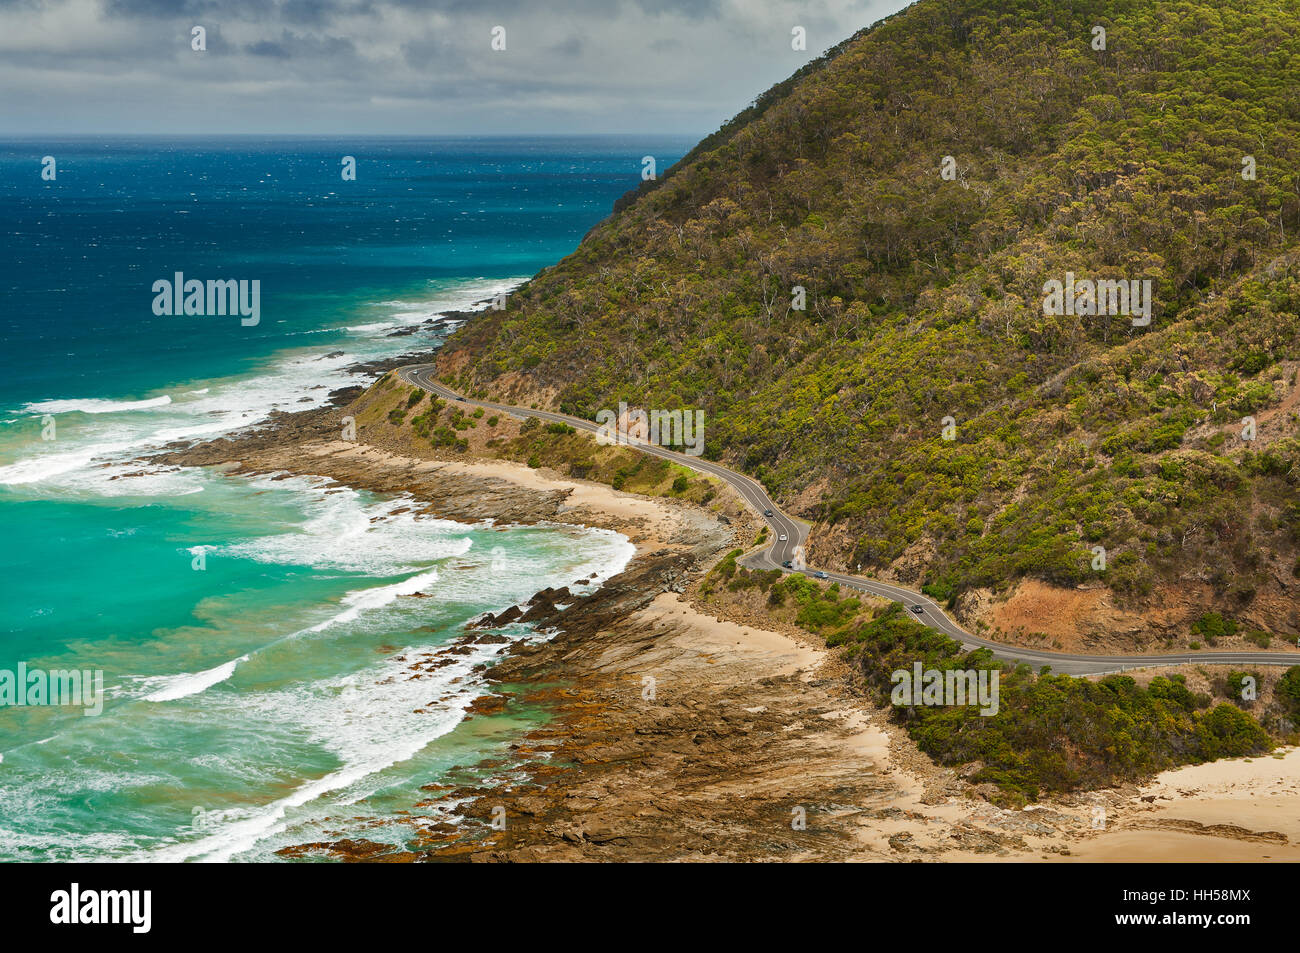 Famous Great Ocean Road winding along the coastline of Victoria. Stock Photo